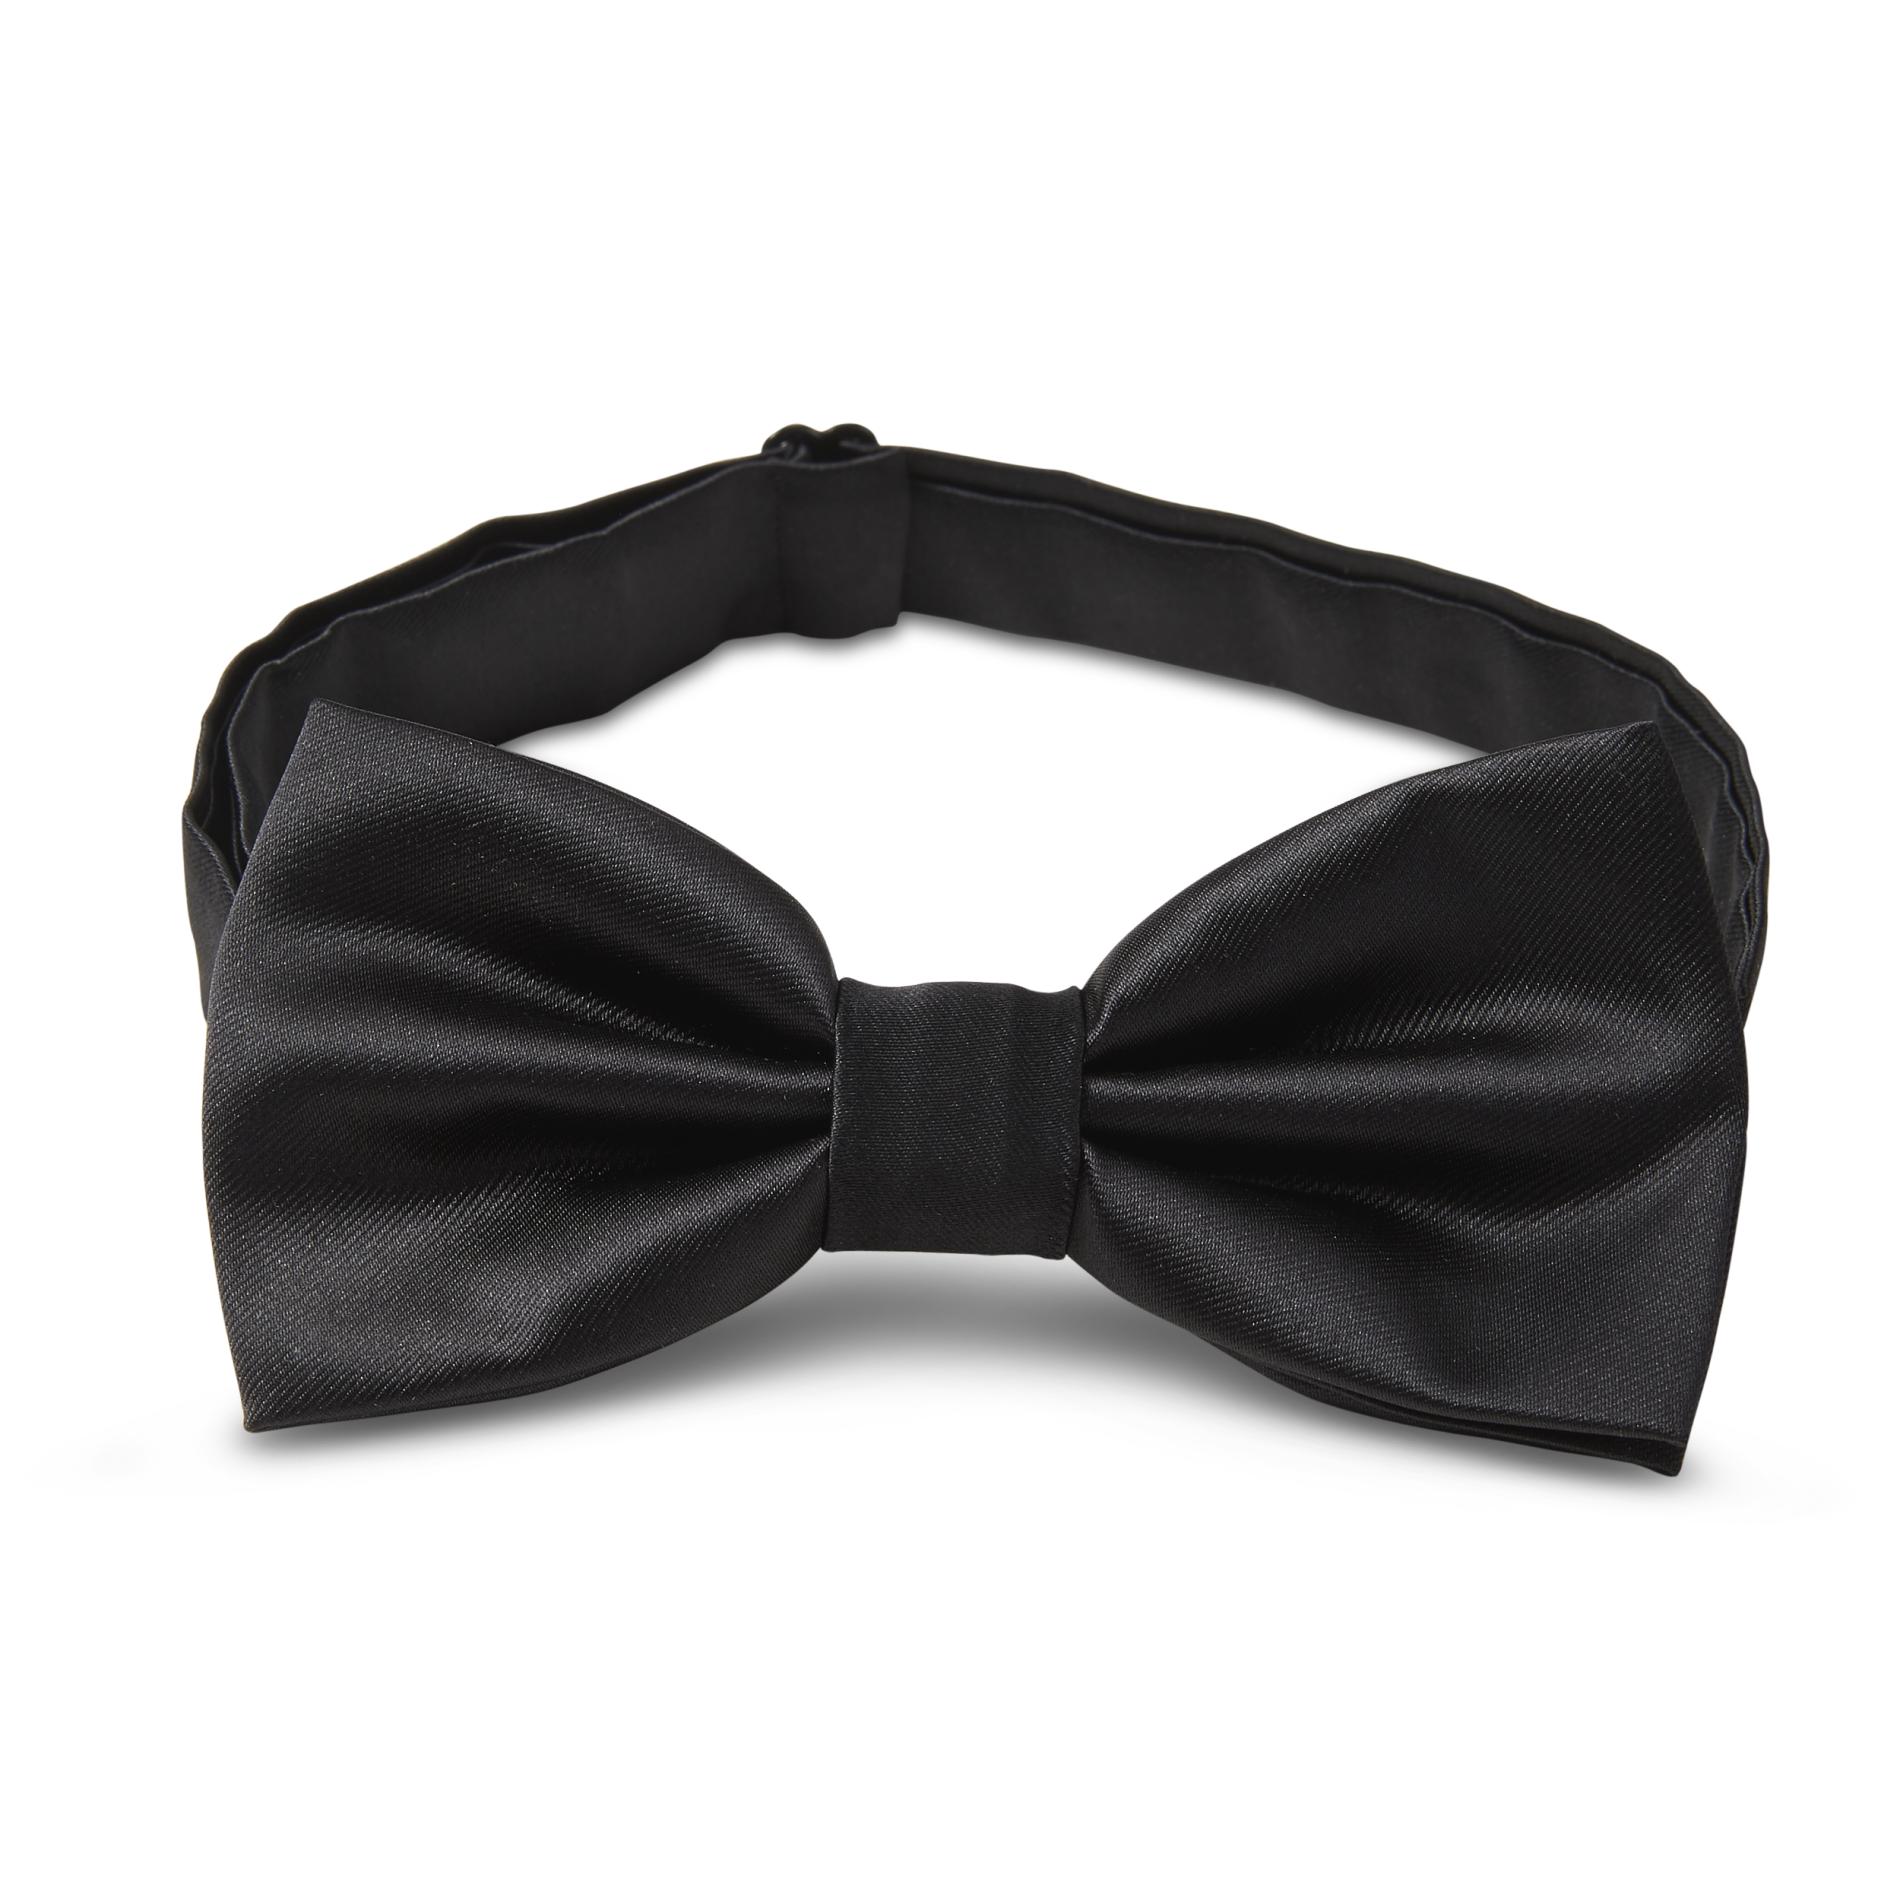 Basic Editions Men's Bow Tie